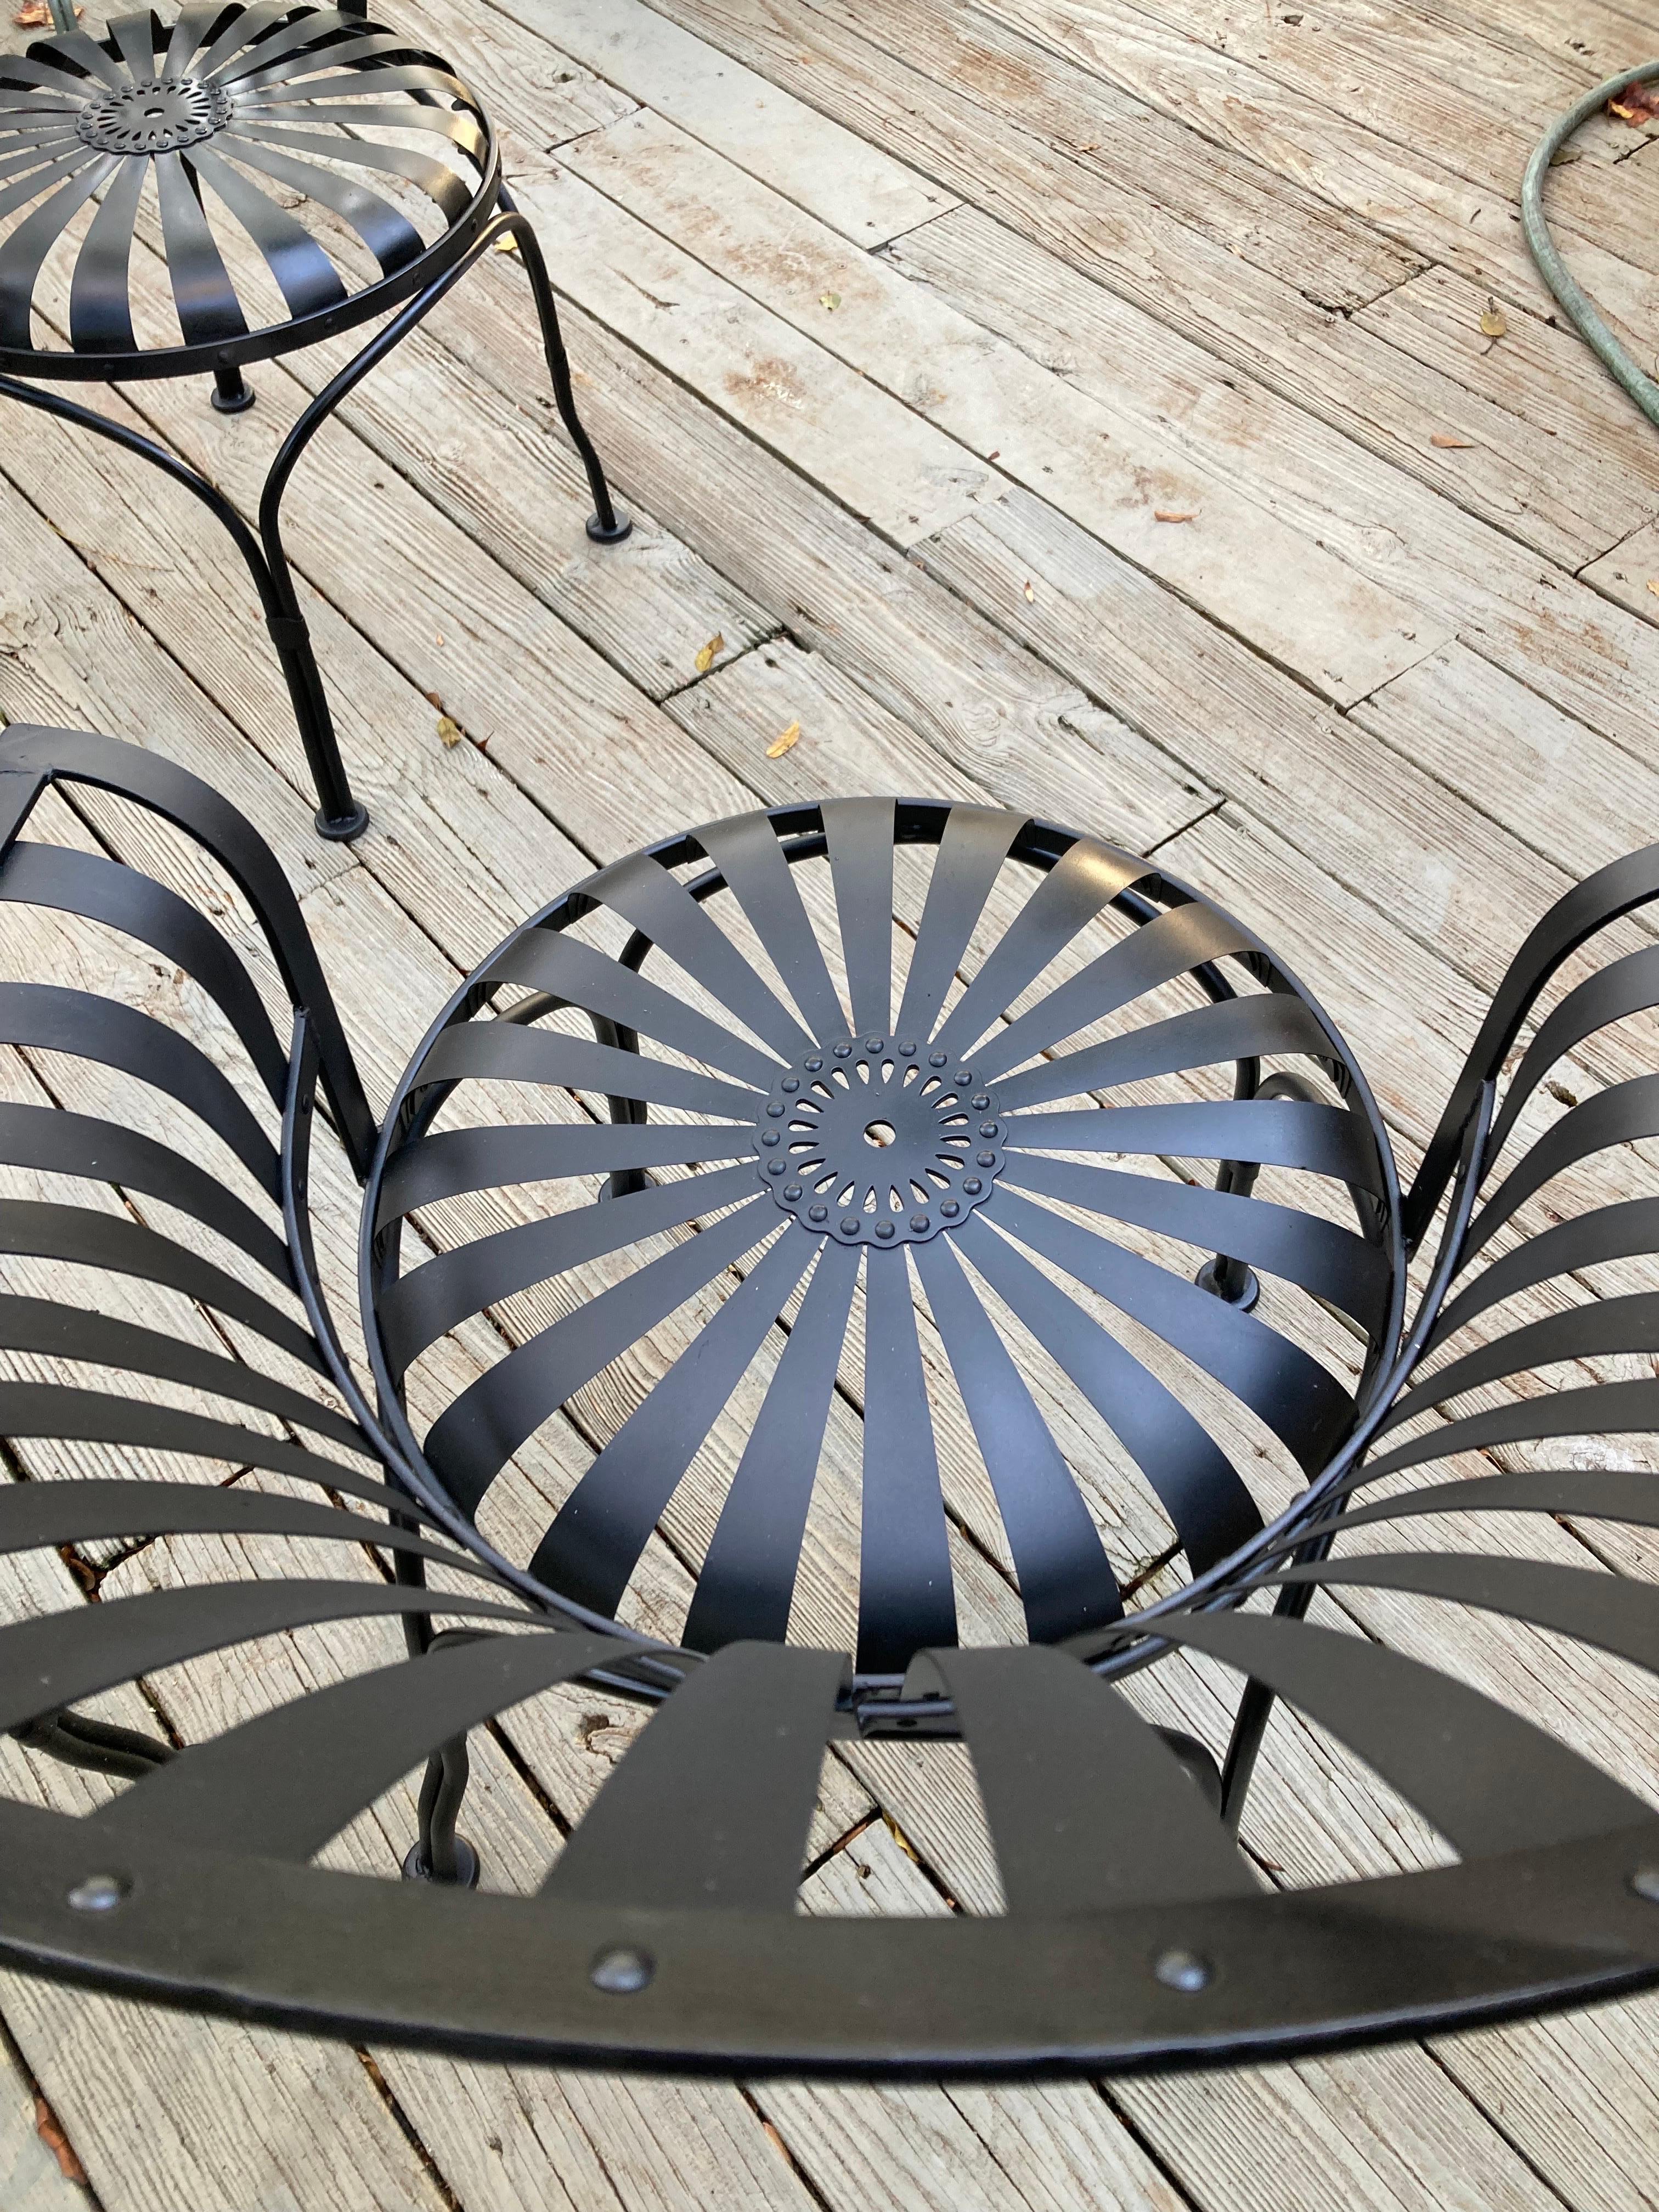 French Francois Carre Fan Back Garden Chairs - set of 4